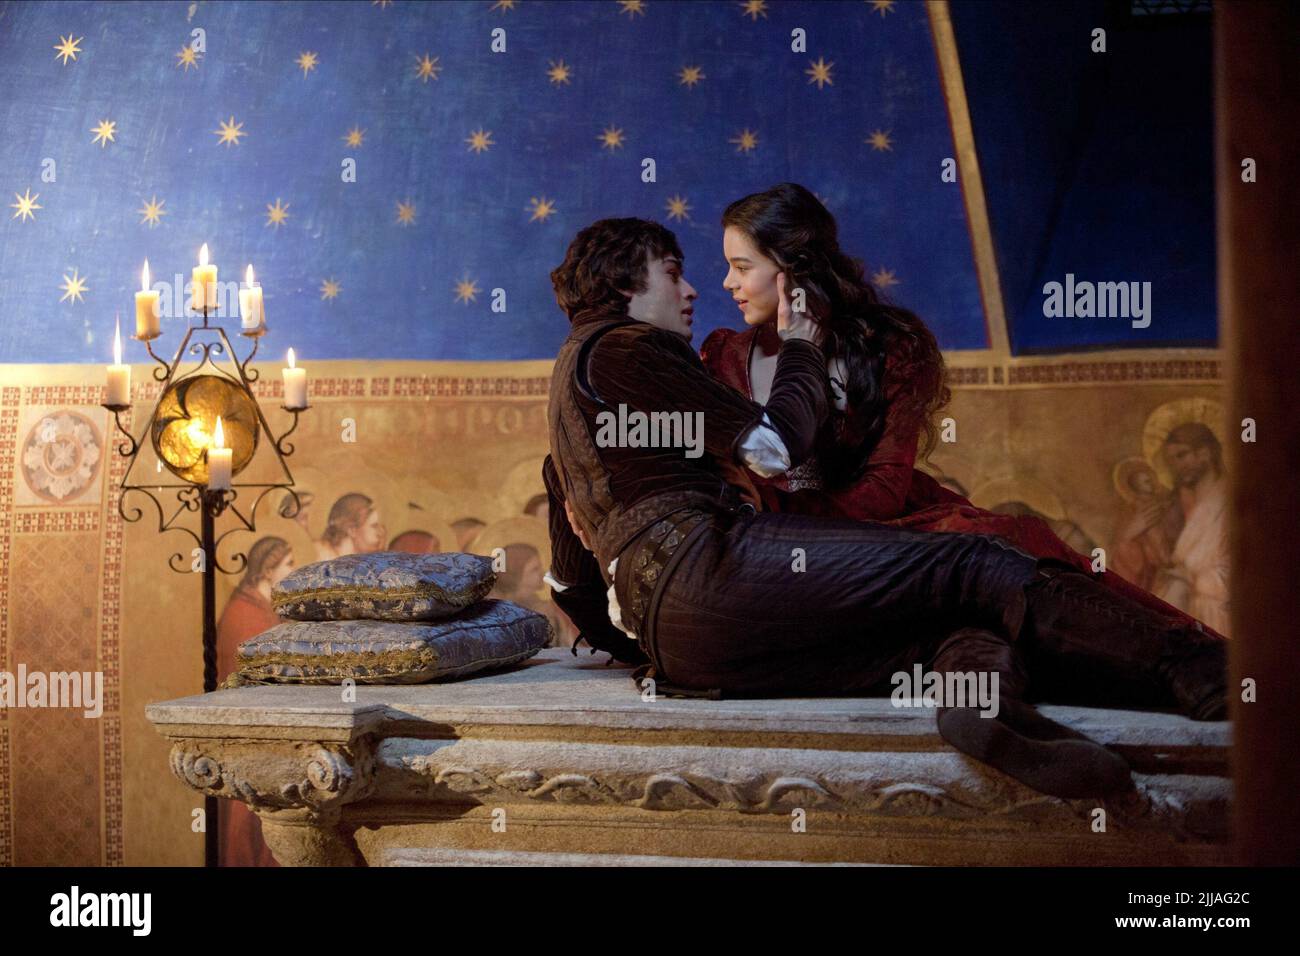 BOOTH,STEINFELD, ROMEO AND JULIET, 2013 Stock Photo